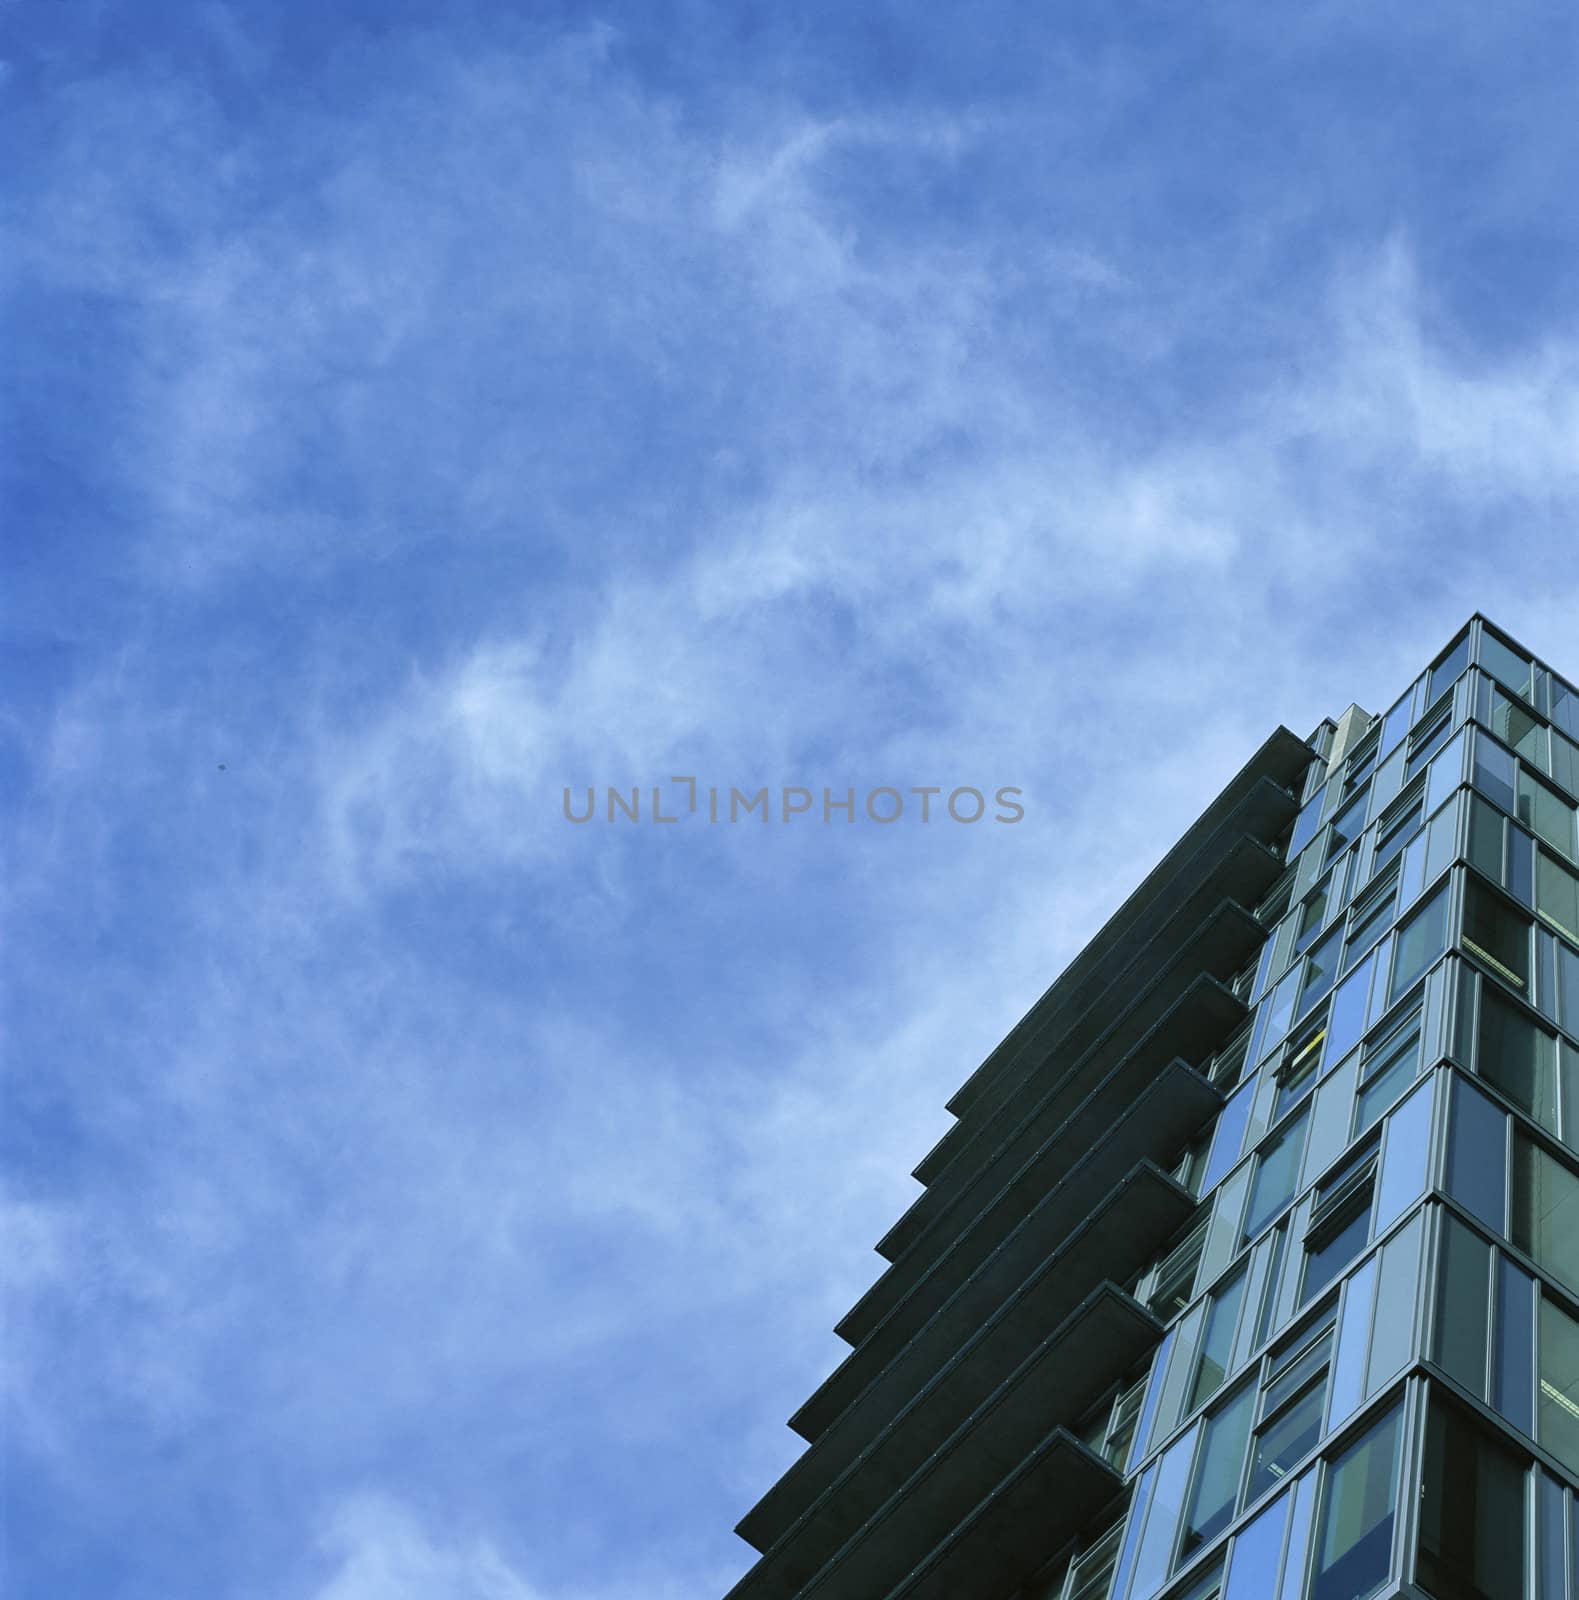 Tall, modern glass building against bright sky